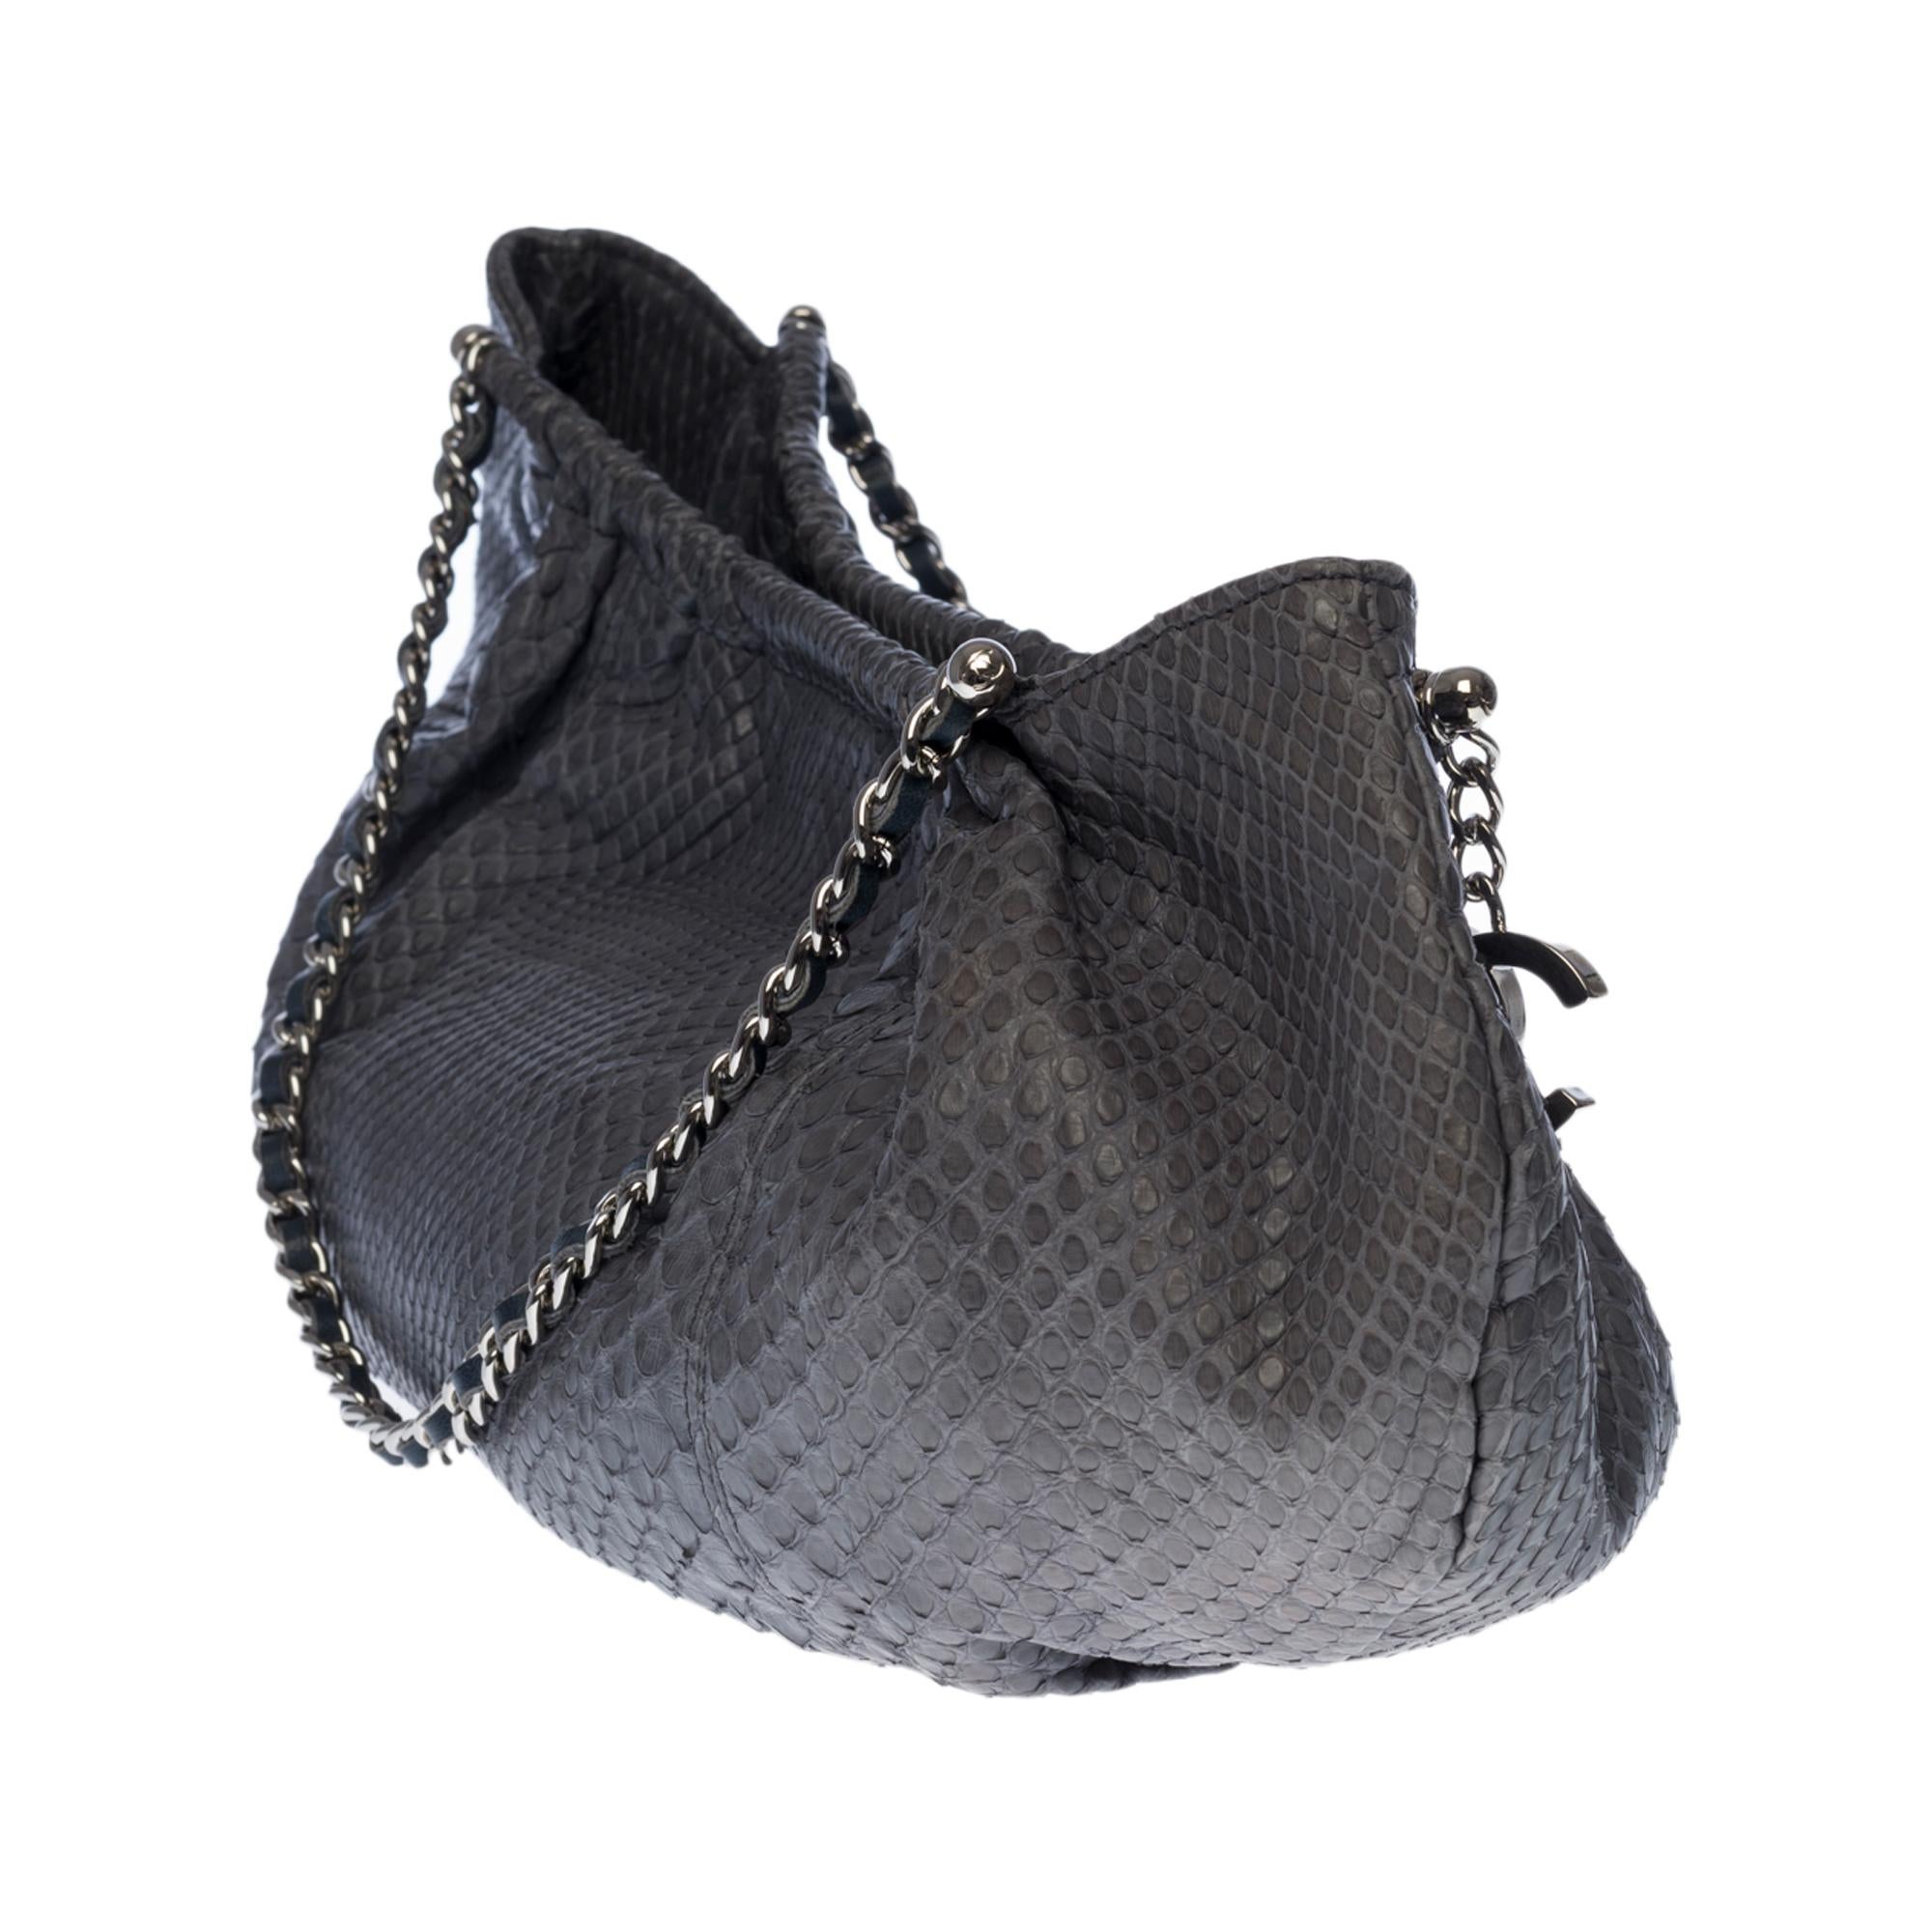 Women's Chanel Classic shoulder bag in grey Python leather, silver hardware